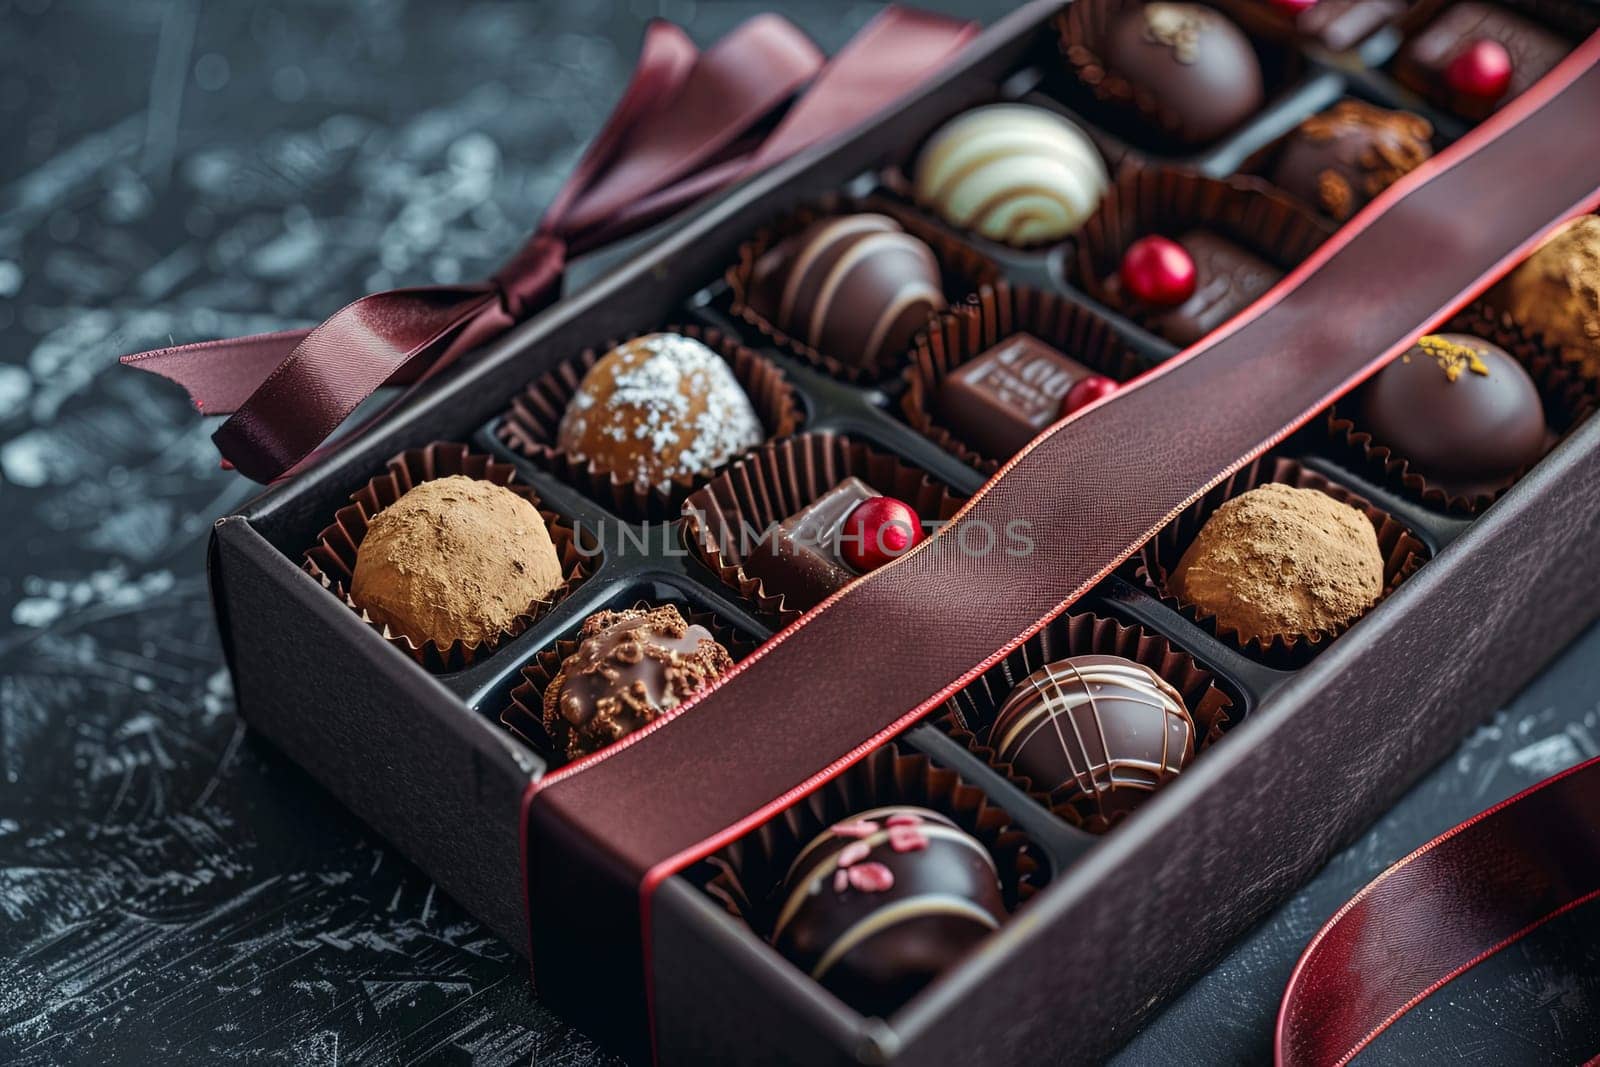 An elegant box of assorted chocolate truffles with decorative ribbons, placed on a table.